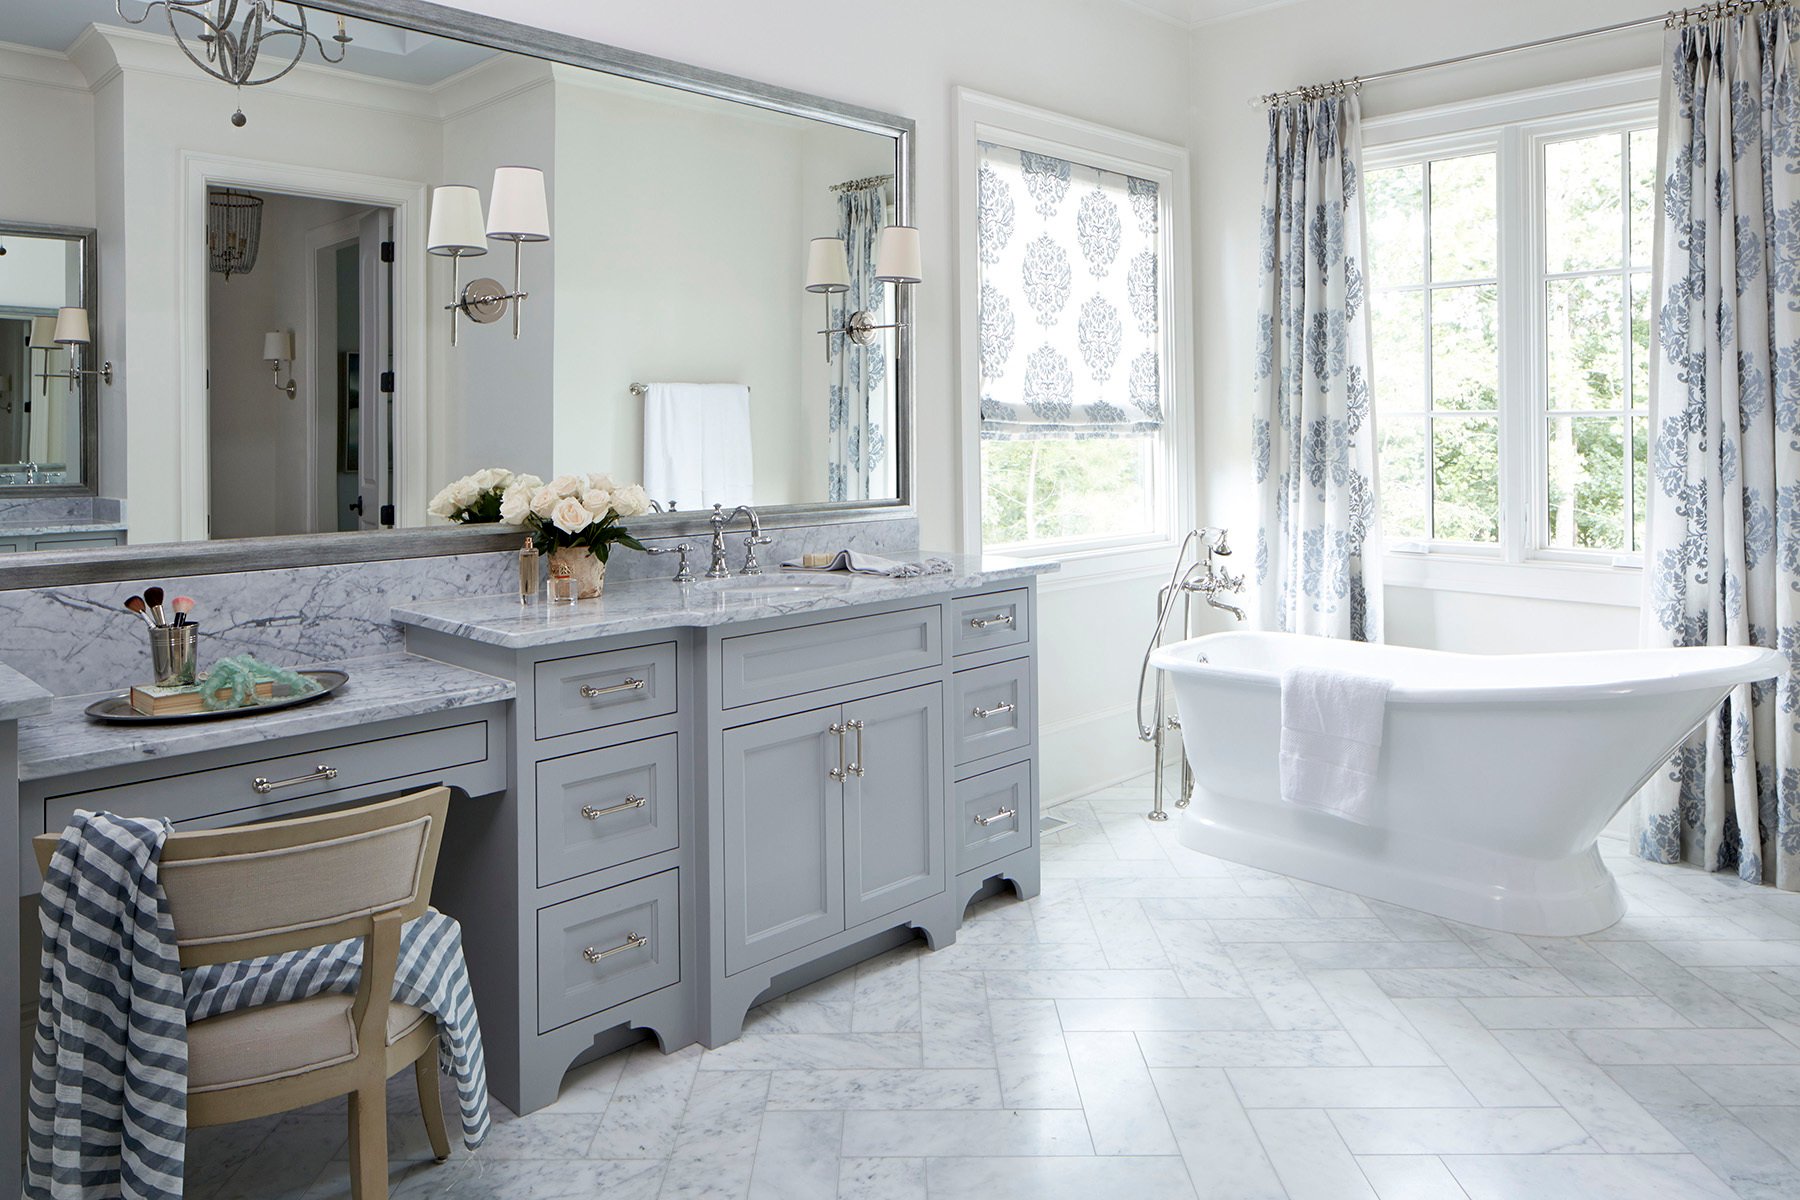 beautiful bright bathroom with marble, gray shaker style cabinetry, a soaking tub & white windows.